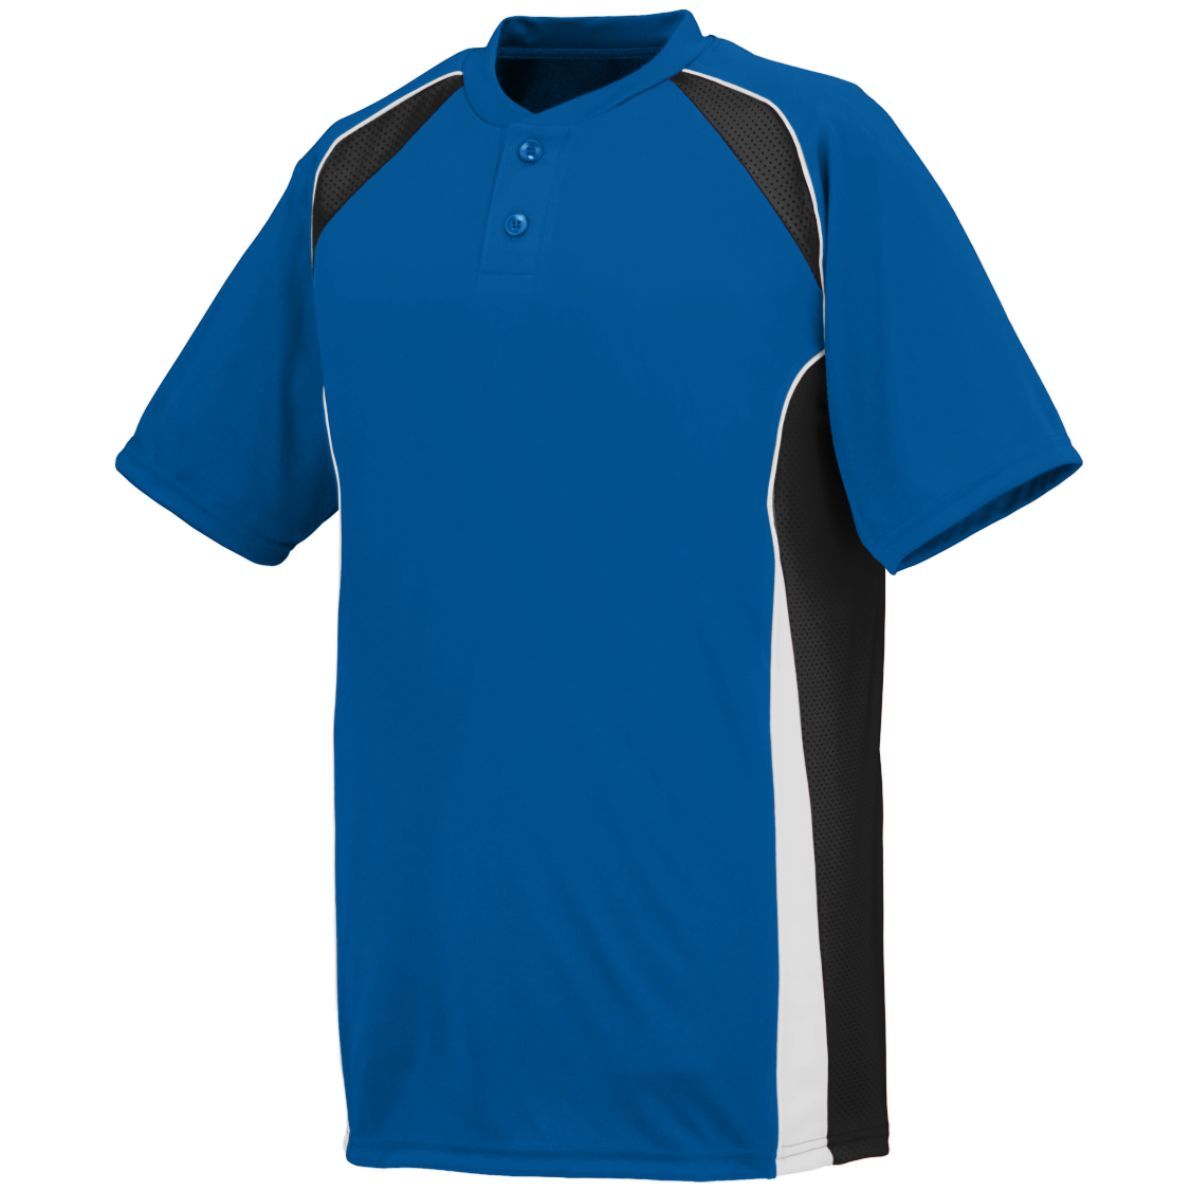 Augusta Sportswear Base Hit Jersey in Royal/Black/White  -Part of the Adult, Adult-Jersey, Augusta-Products, Baseball, Shirts, All-Sports, All-Sports-1 product lines at KanaleyCreations.com